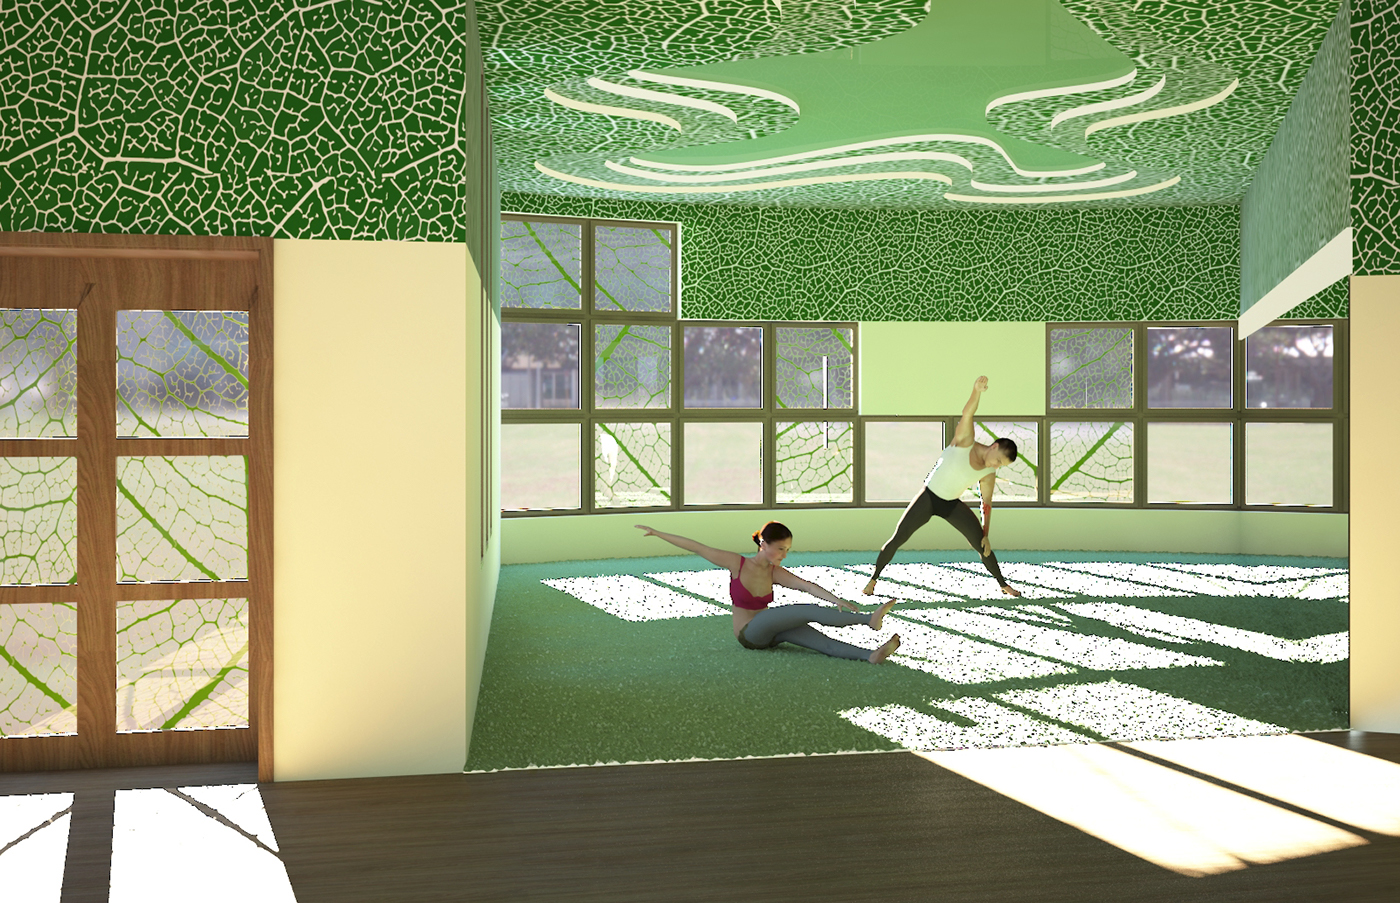 Project green study center club Nature leaf pattern Interior design